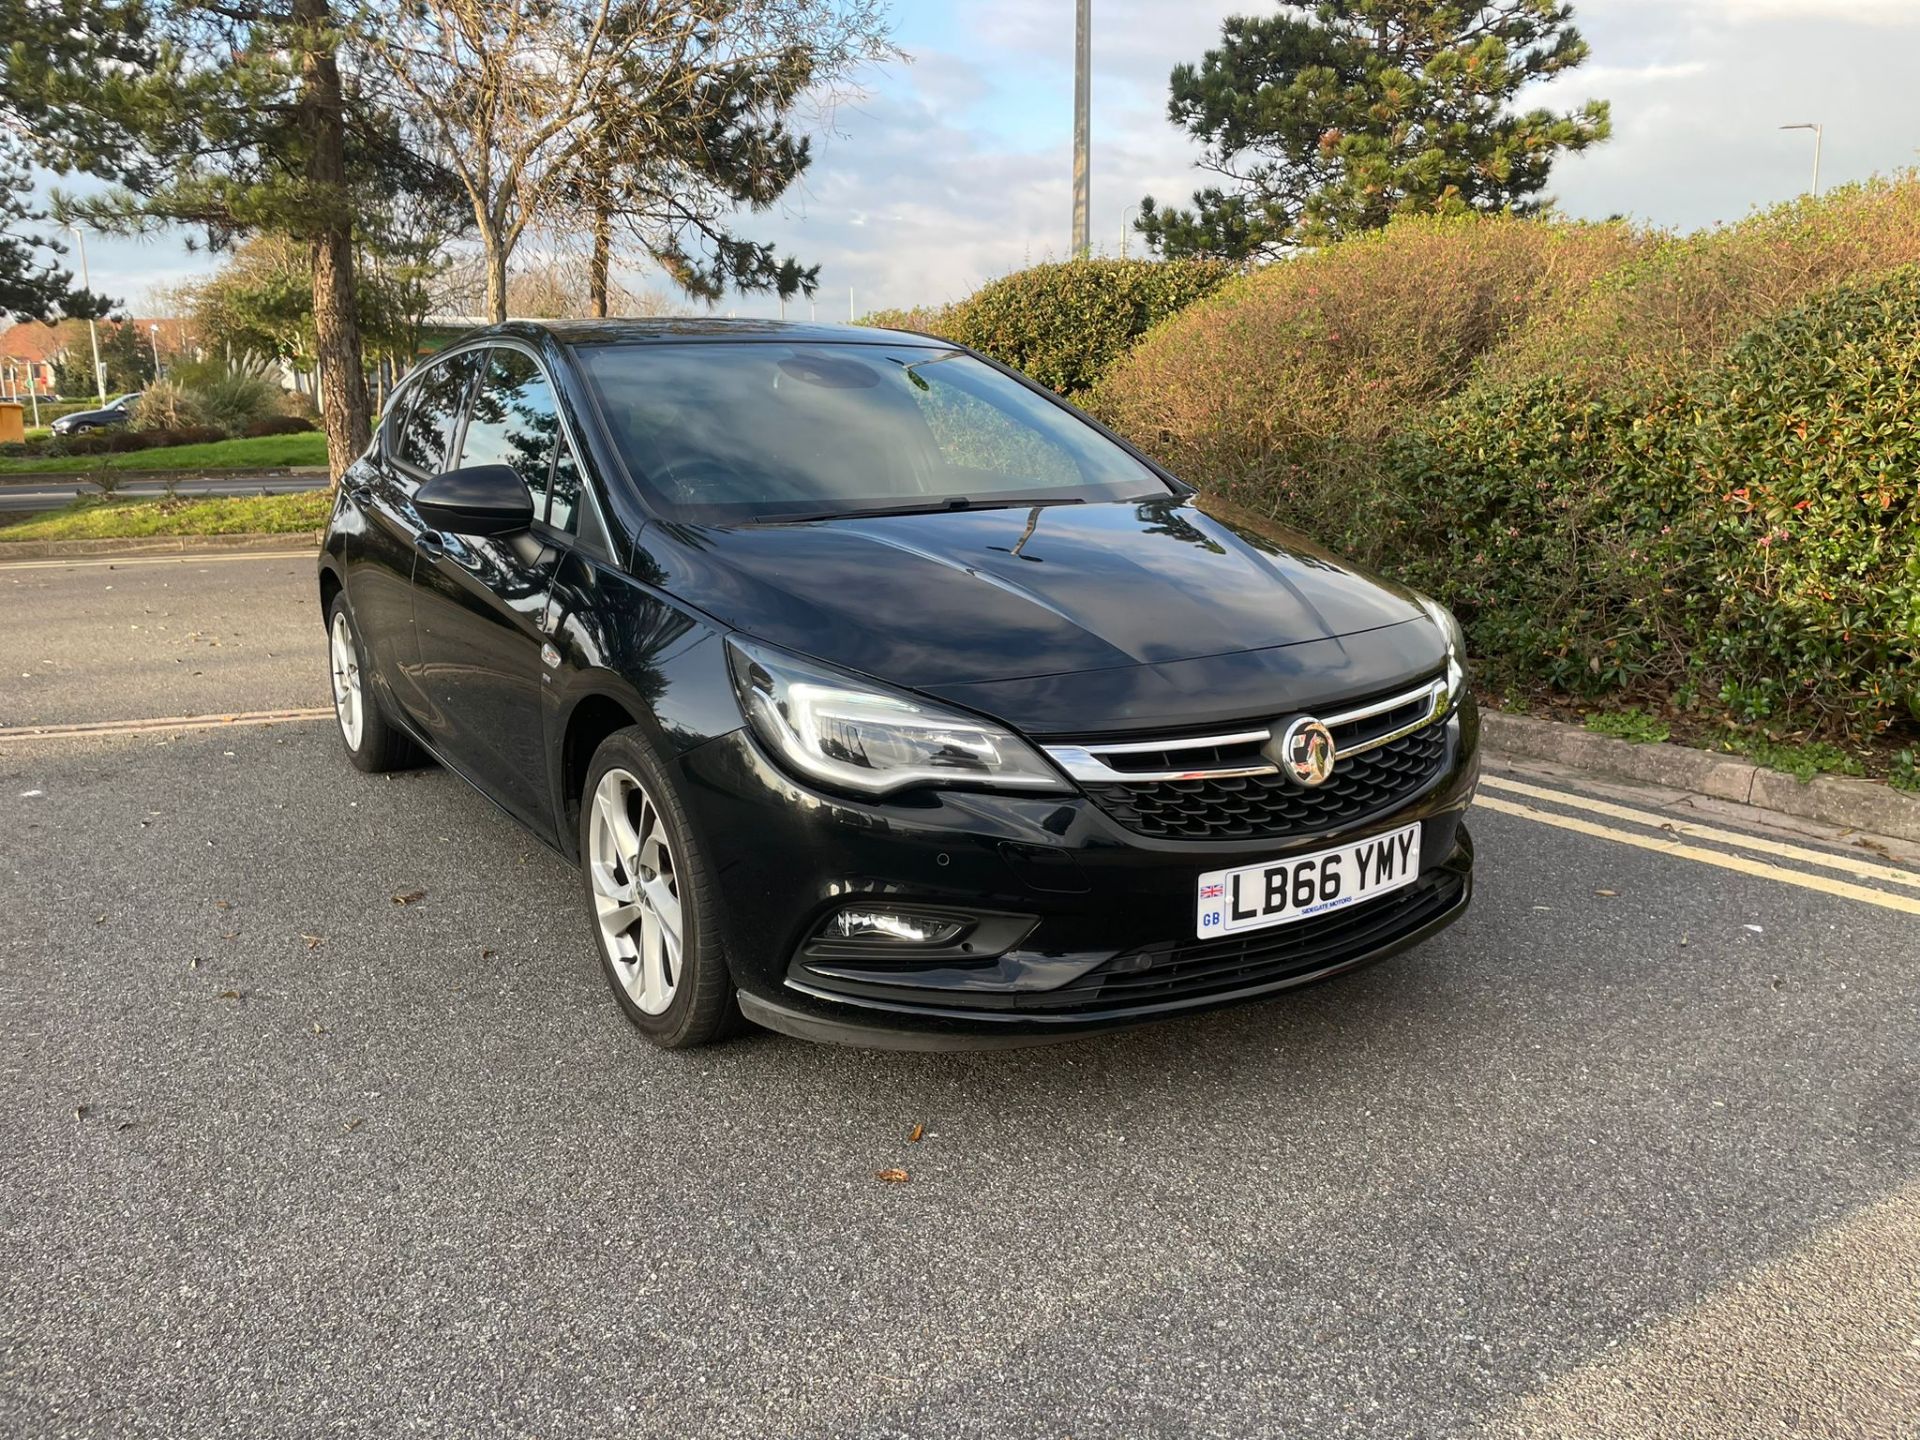 2016 Vauxhall Astra SRI 1.4T (150PS) Manual 6 speed in Black Hatchback - LB66 YMY